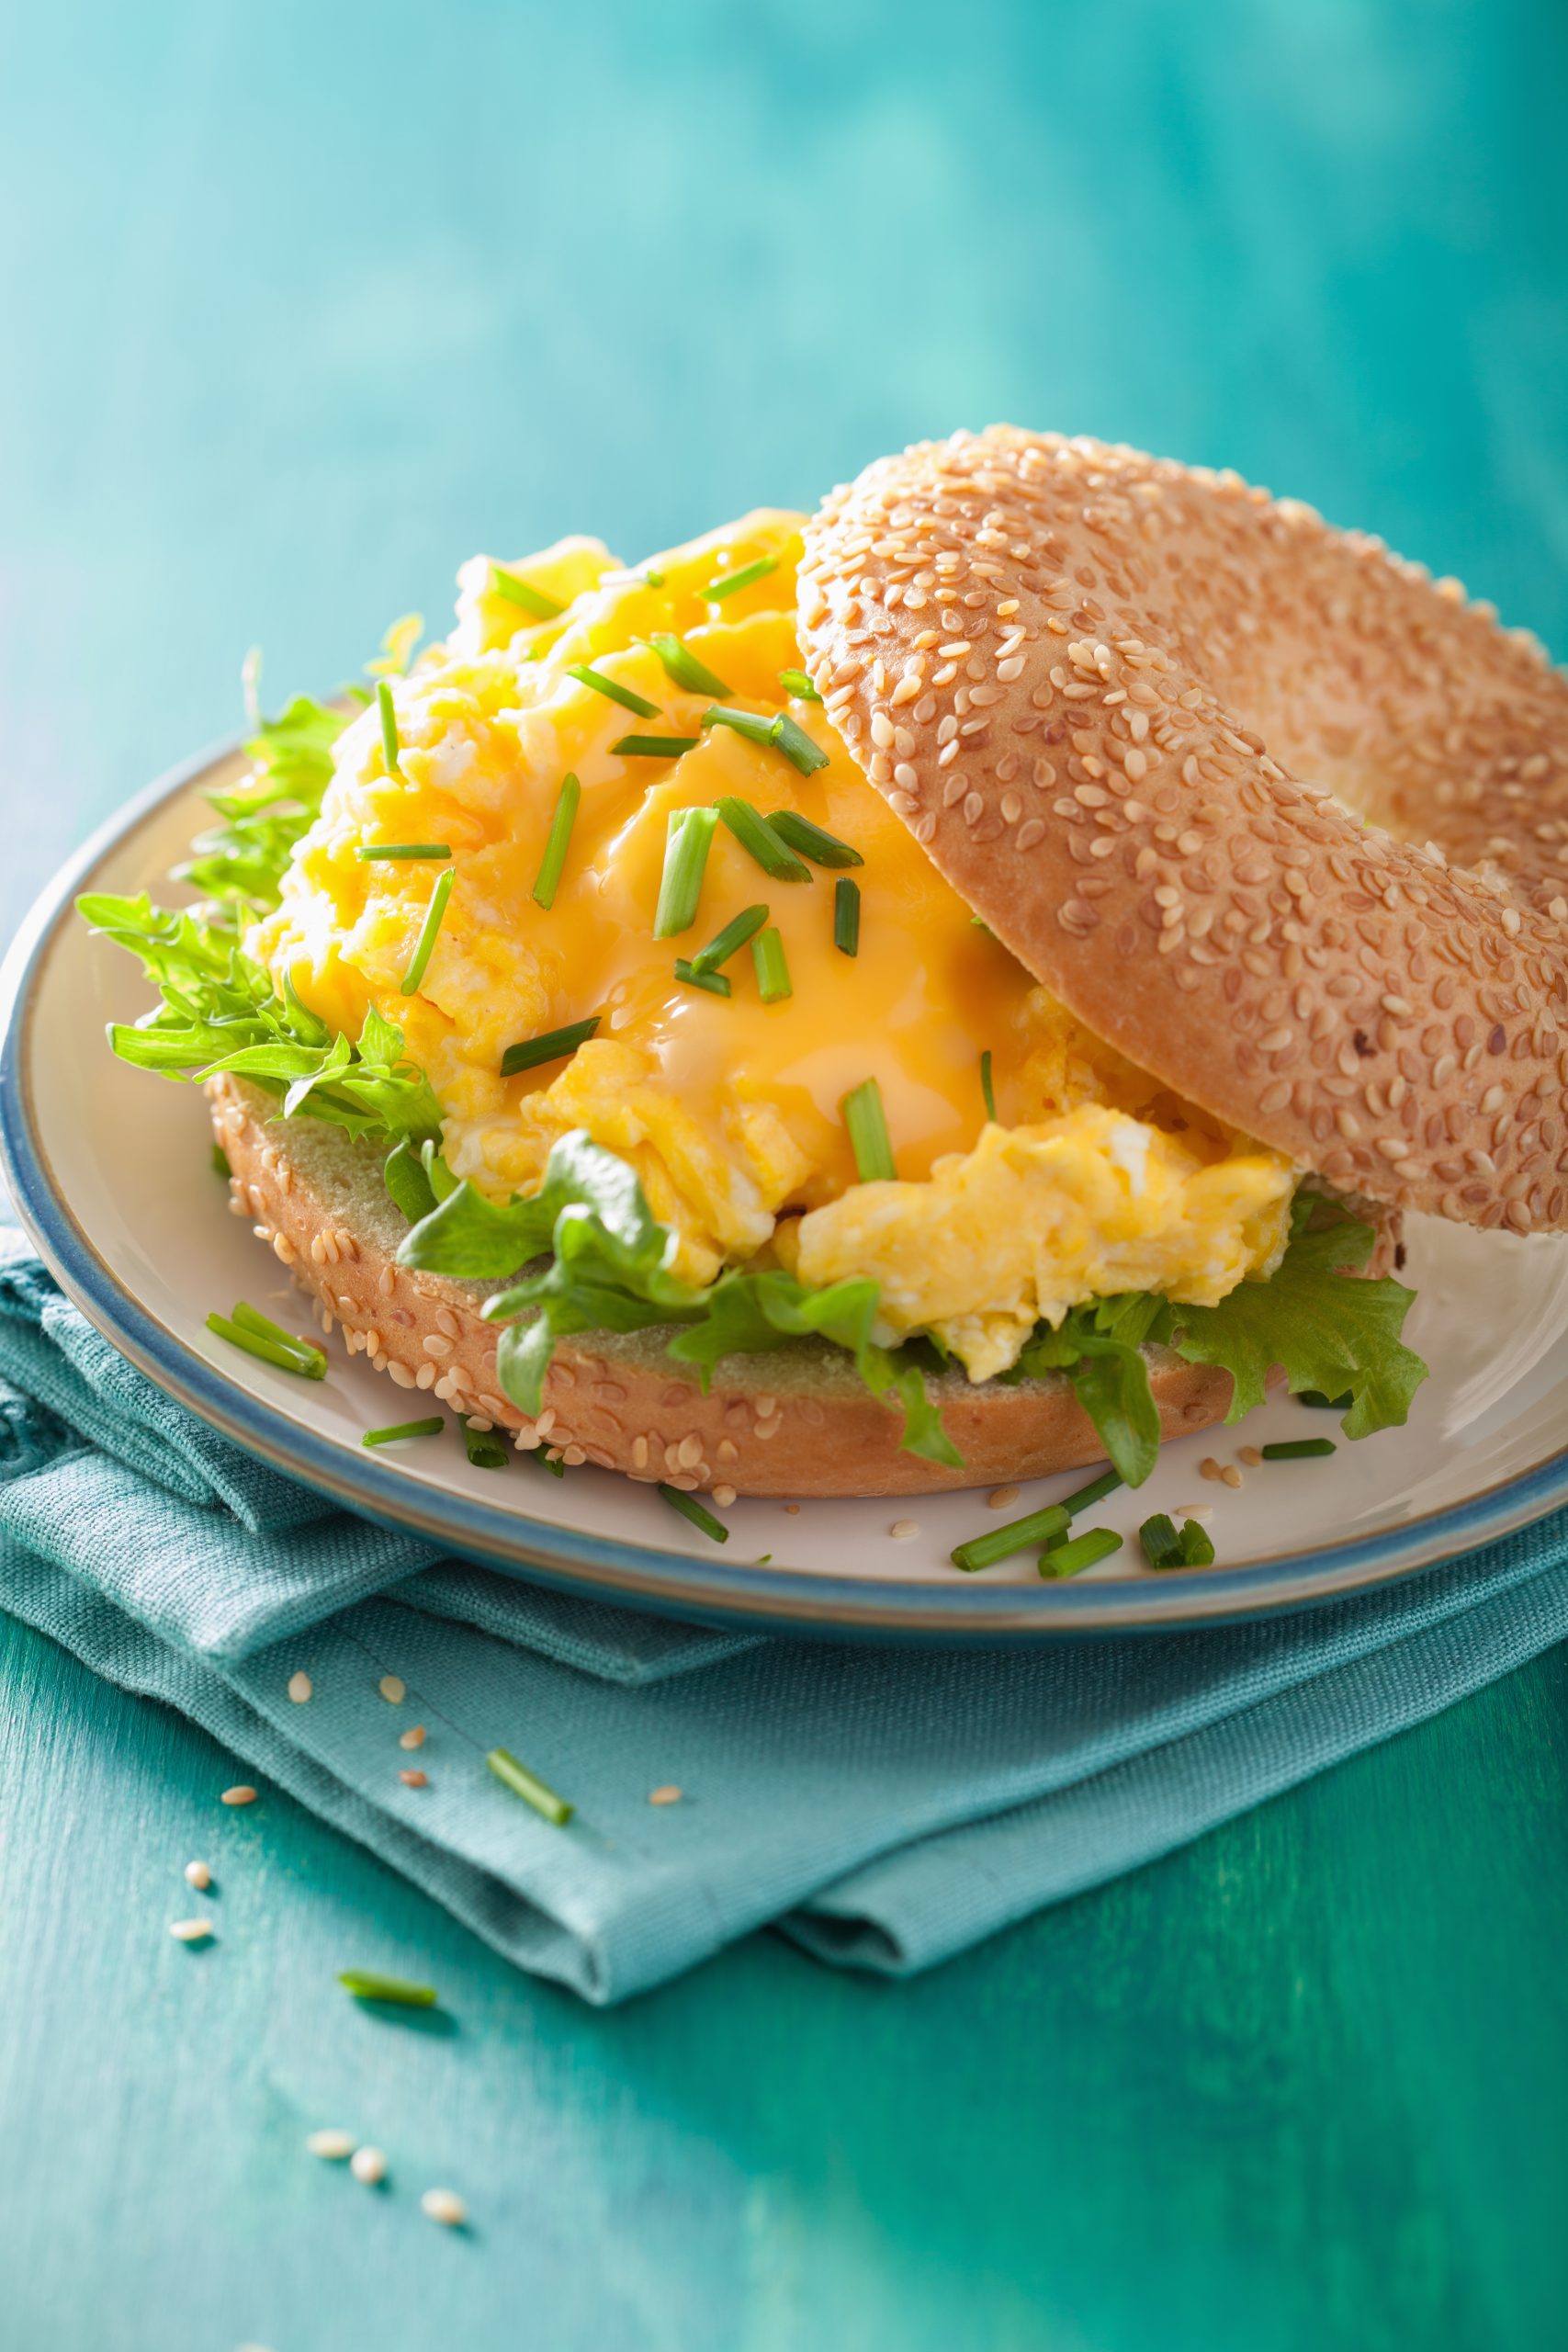 The Ultimate Egg And Cheese Sandwich